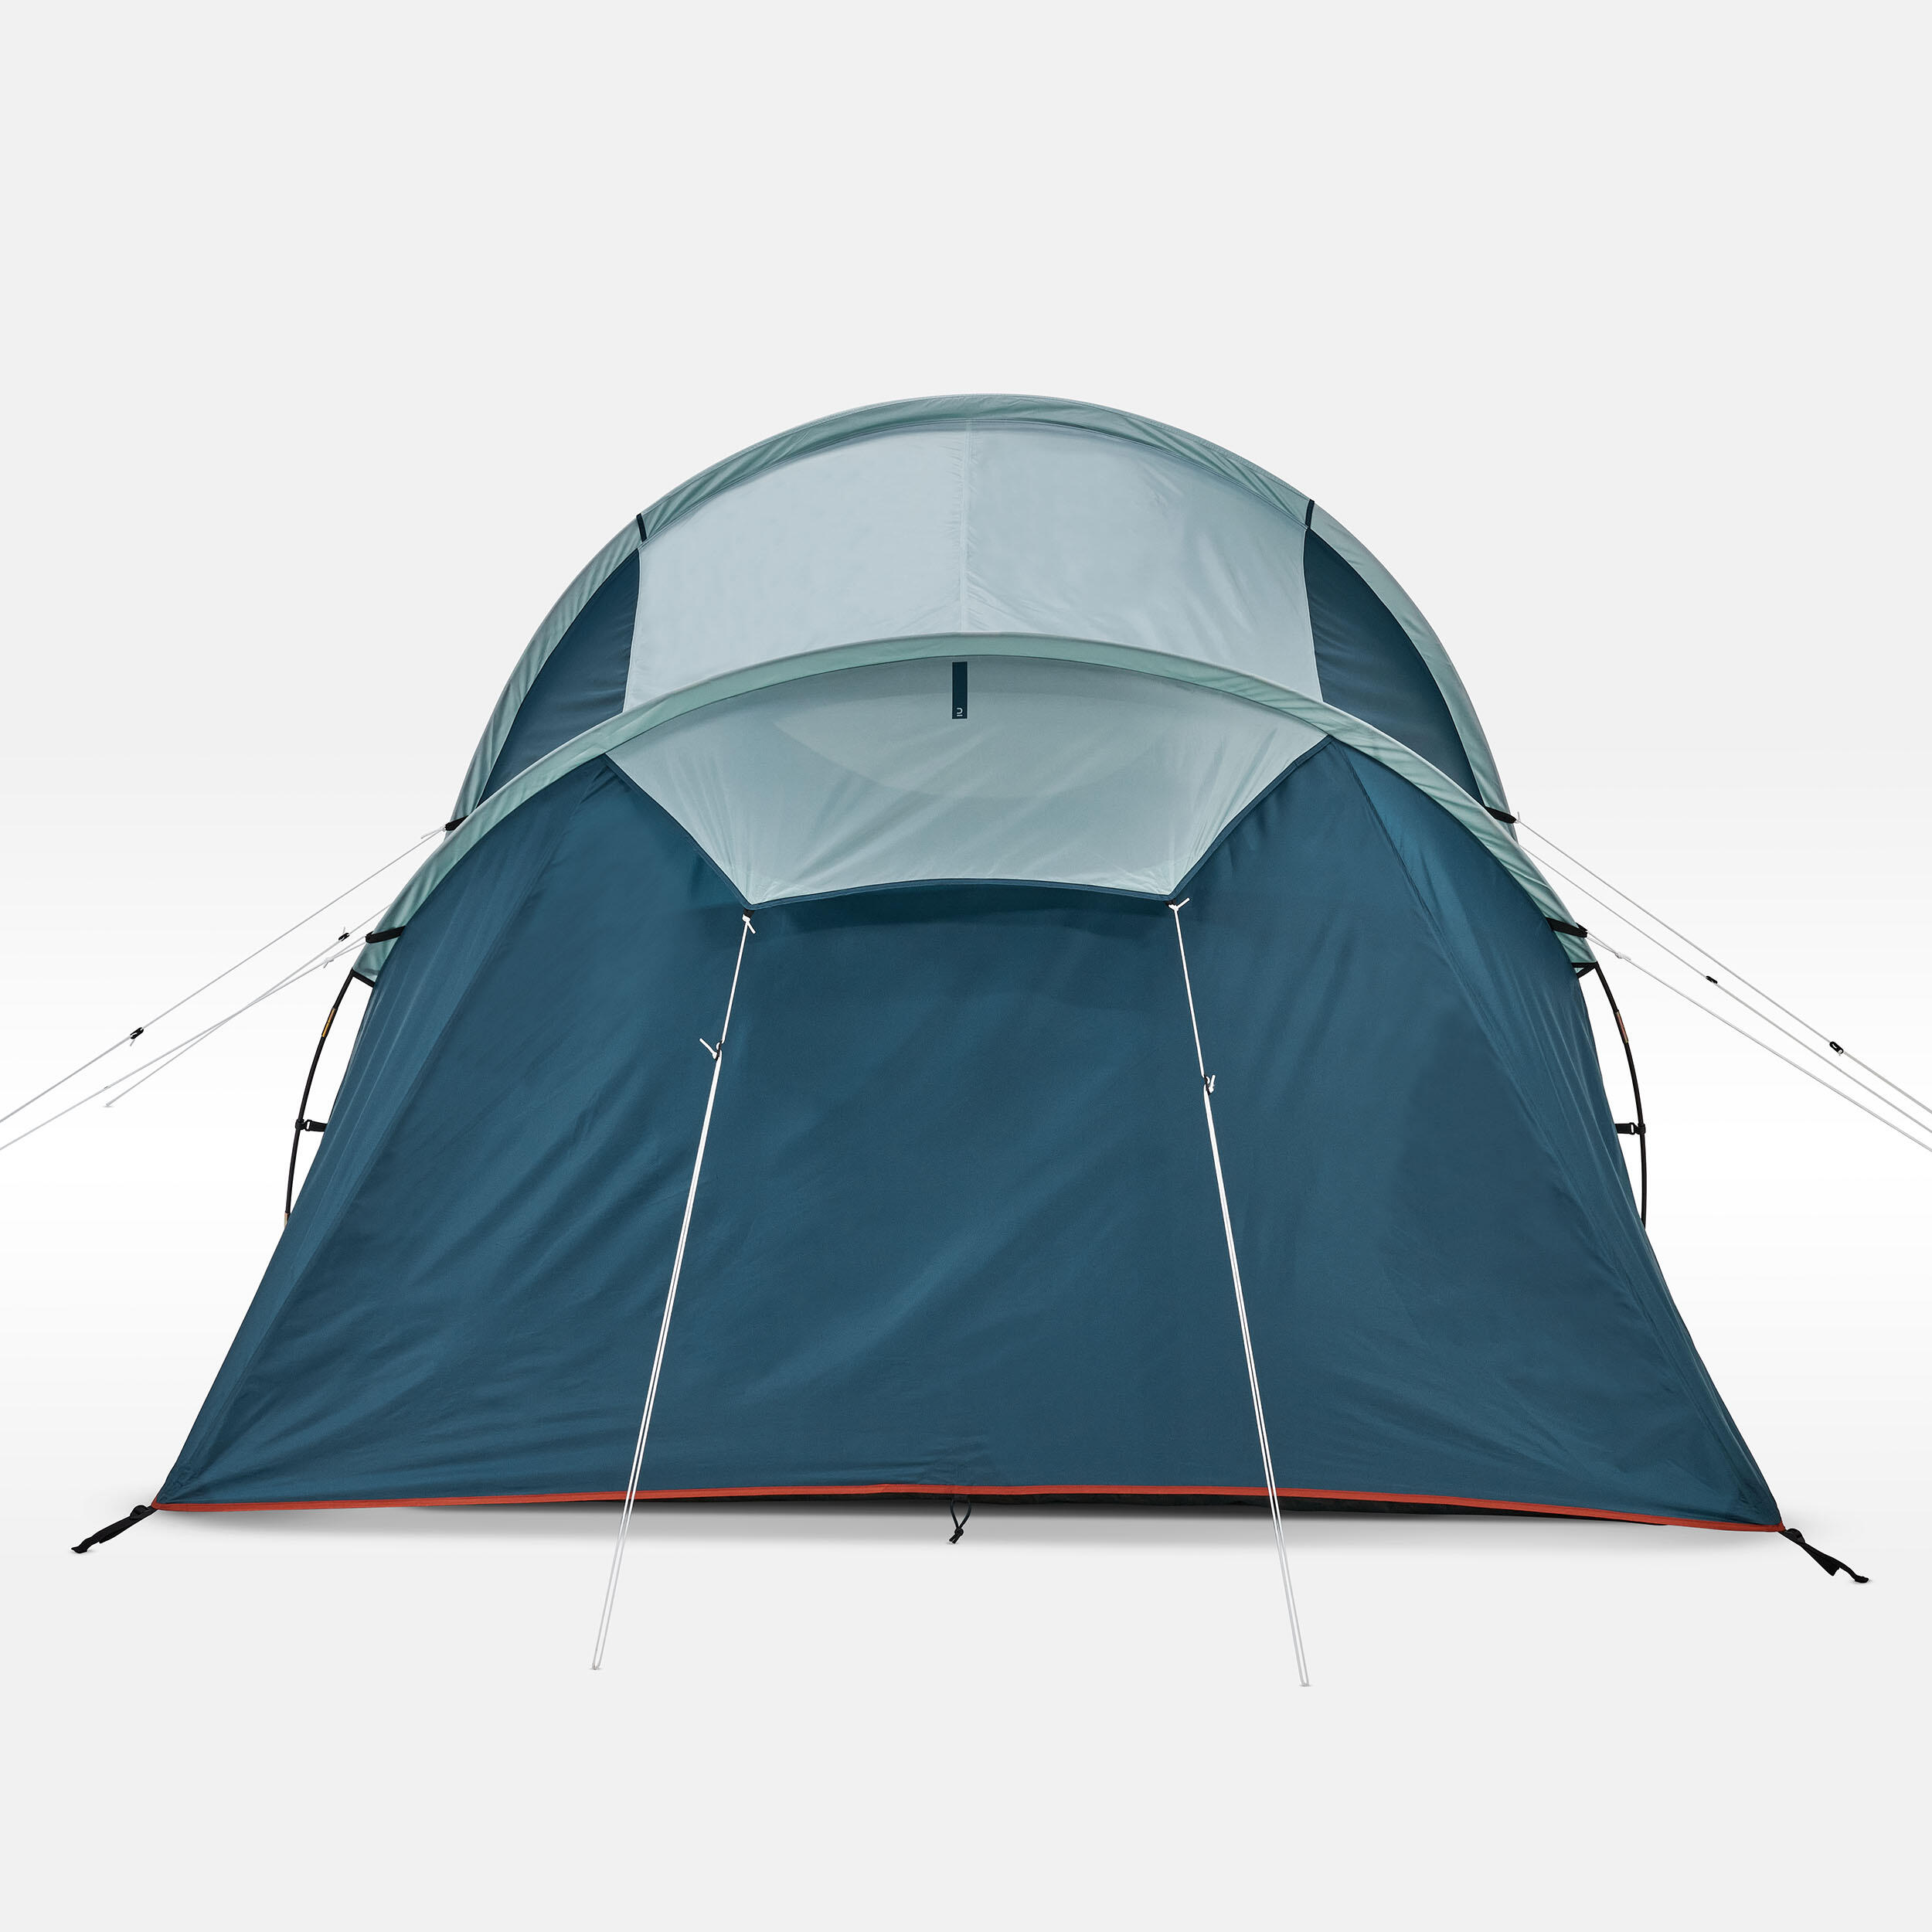 Camping tent with poles - Arpenaz 4.1 - 4 Person - 1 Bedroom 6/22